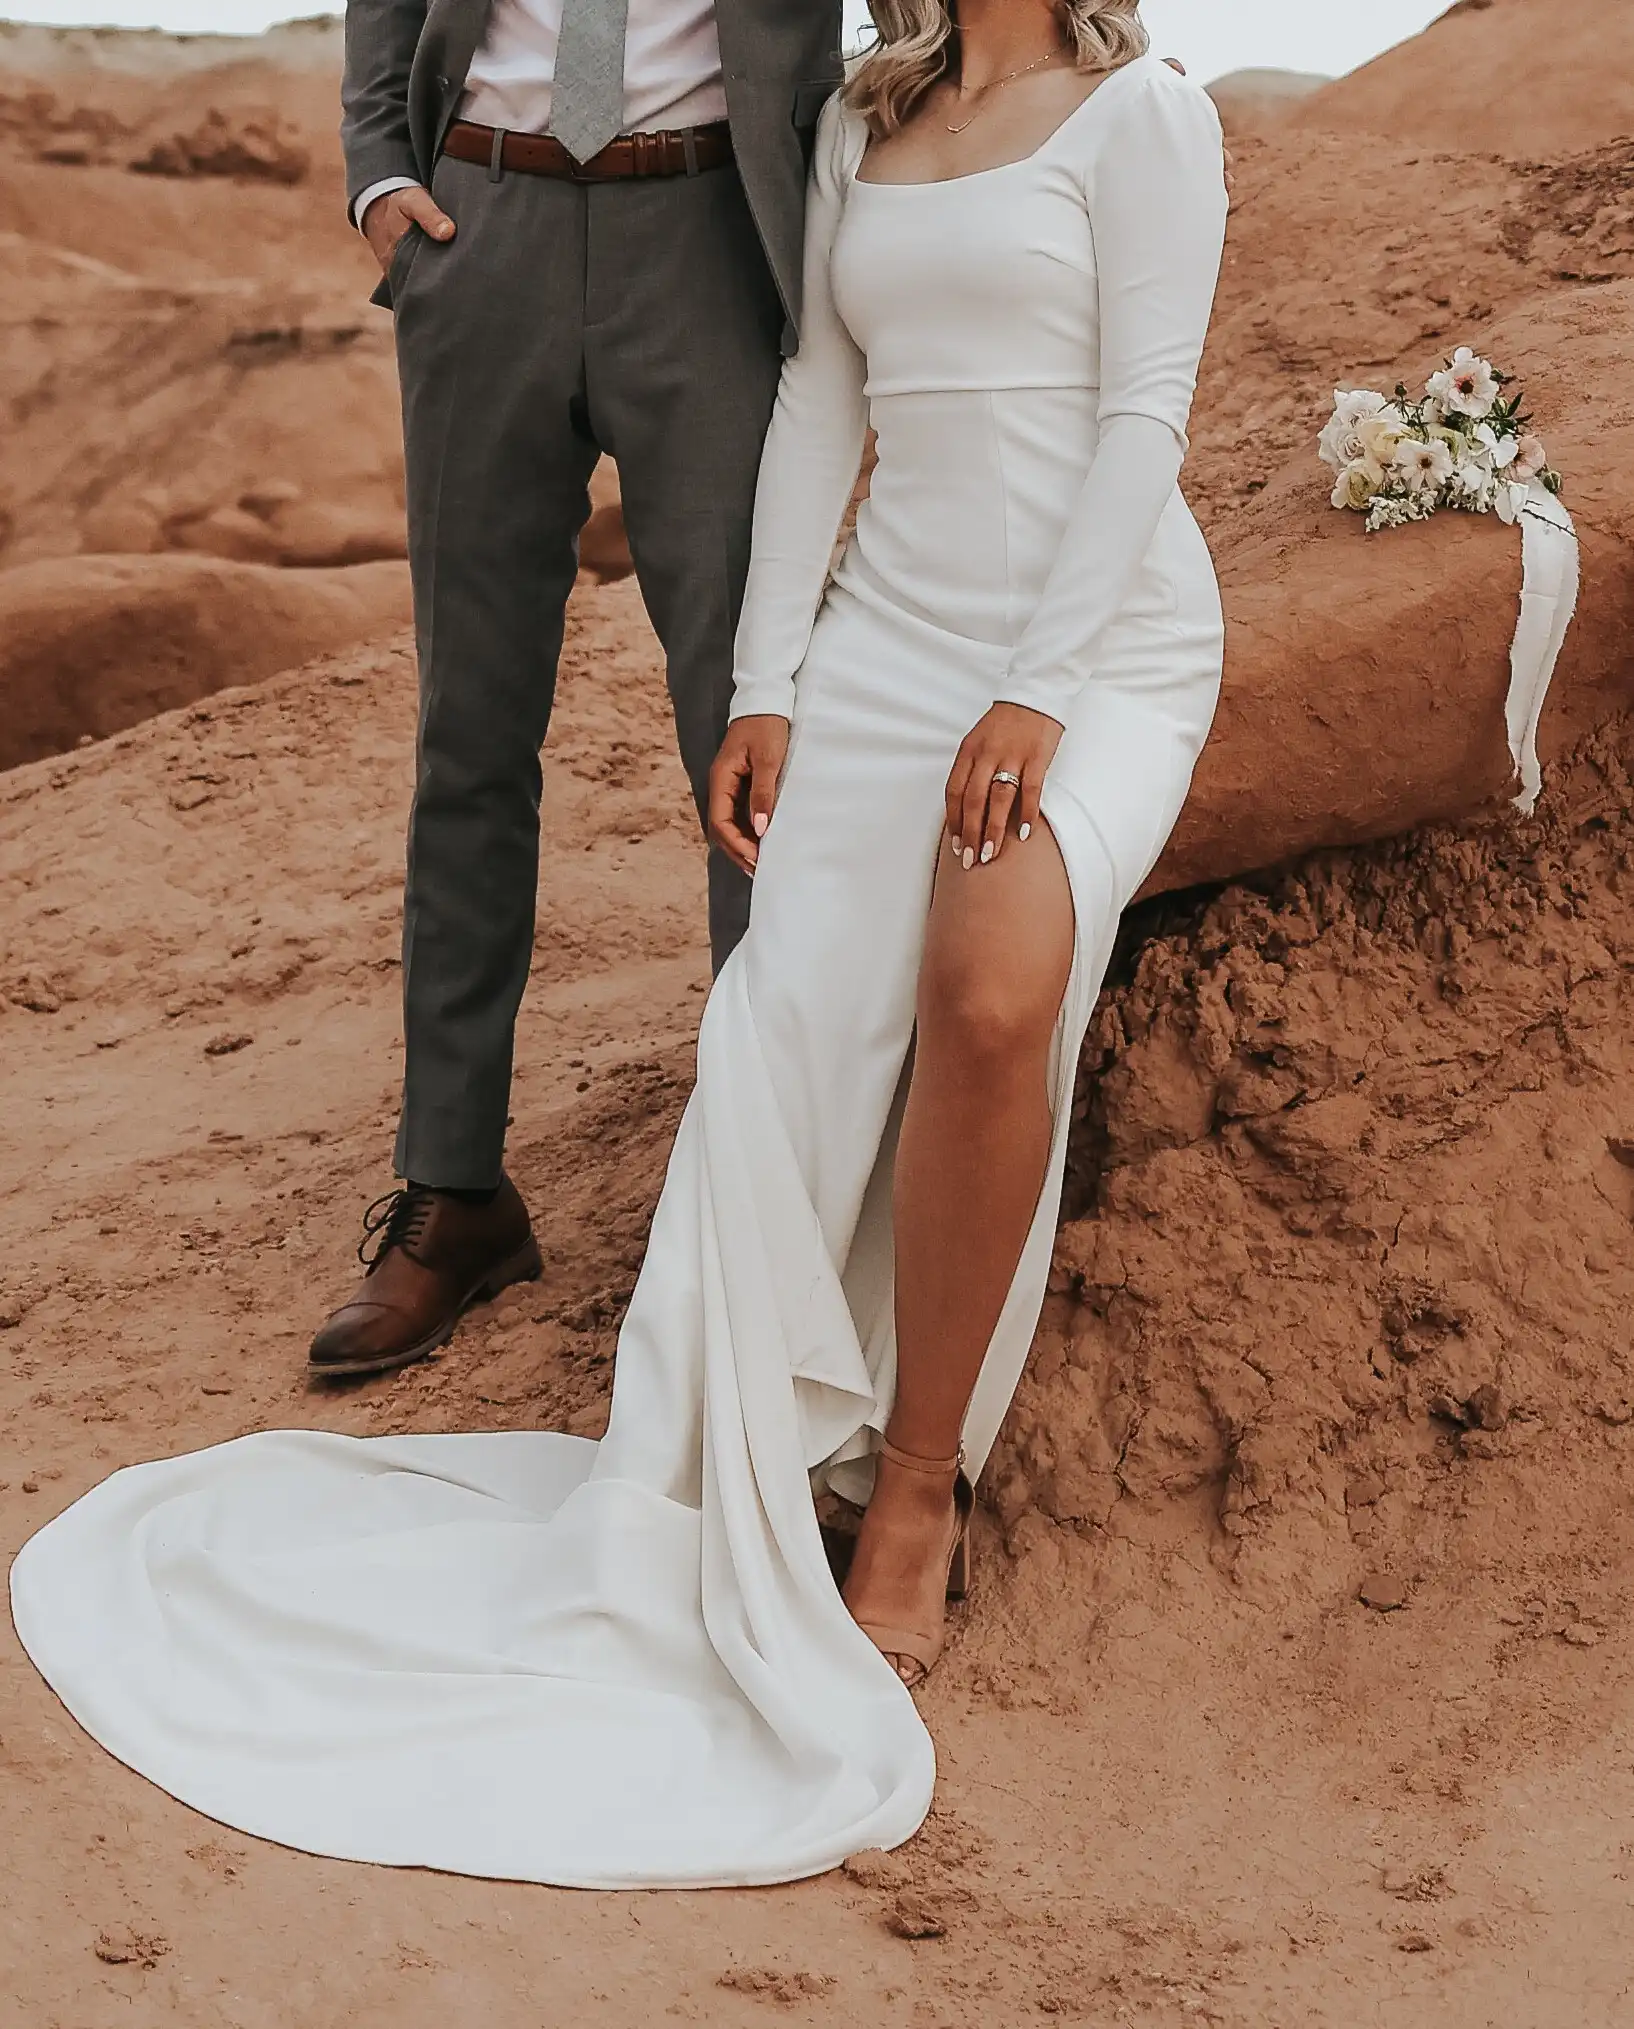 Couple posing for bridals at goblin valley